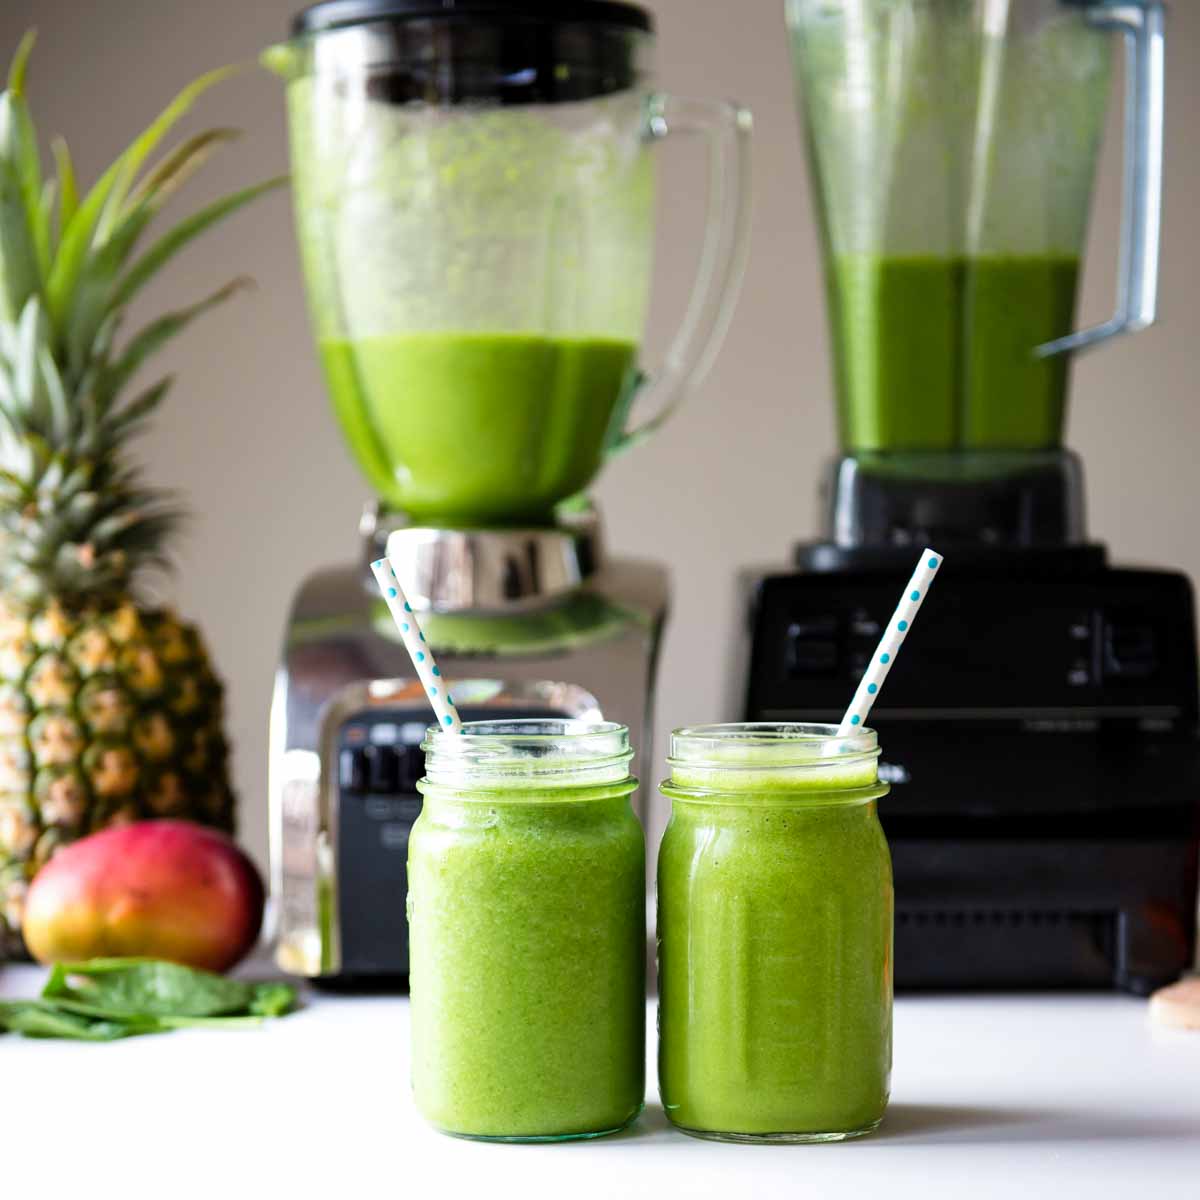 Best Blenders for Smoothies - Top 10 Picks by Smoothie Lovers